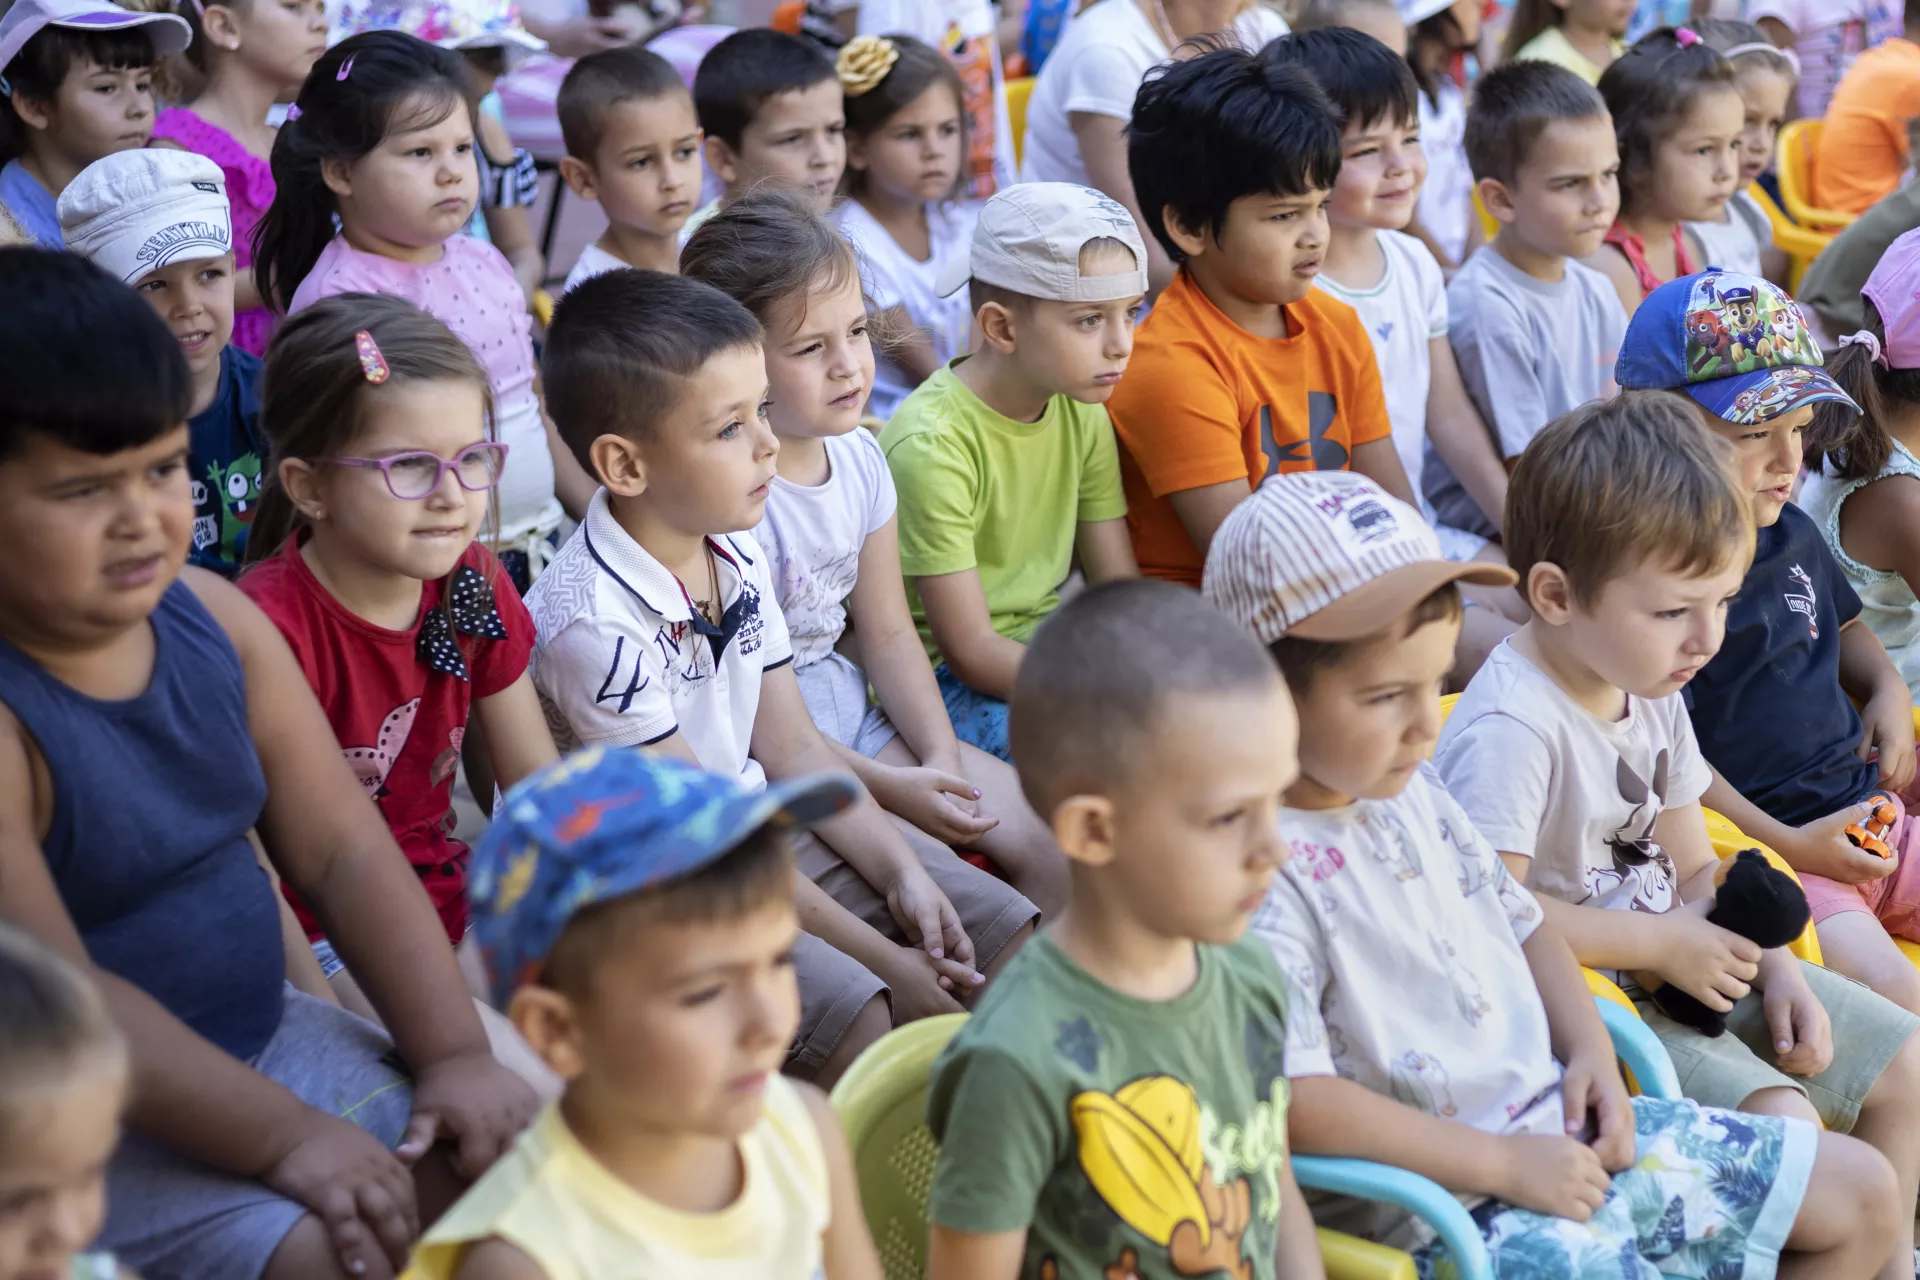 Children watch a theatre performance at the Zvezditsa Kindergarten in Burgas, Bulgaria. This school strives to give an inclusive early education to both special needs and non special needs children.